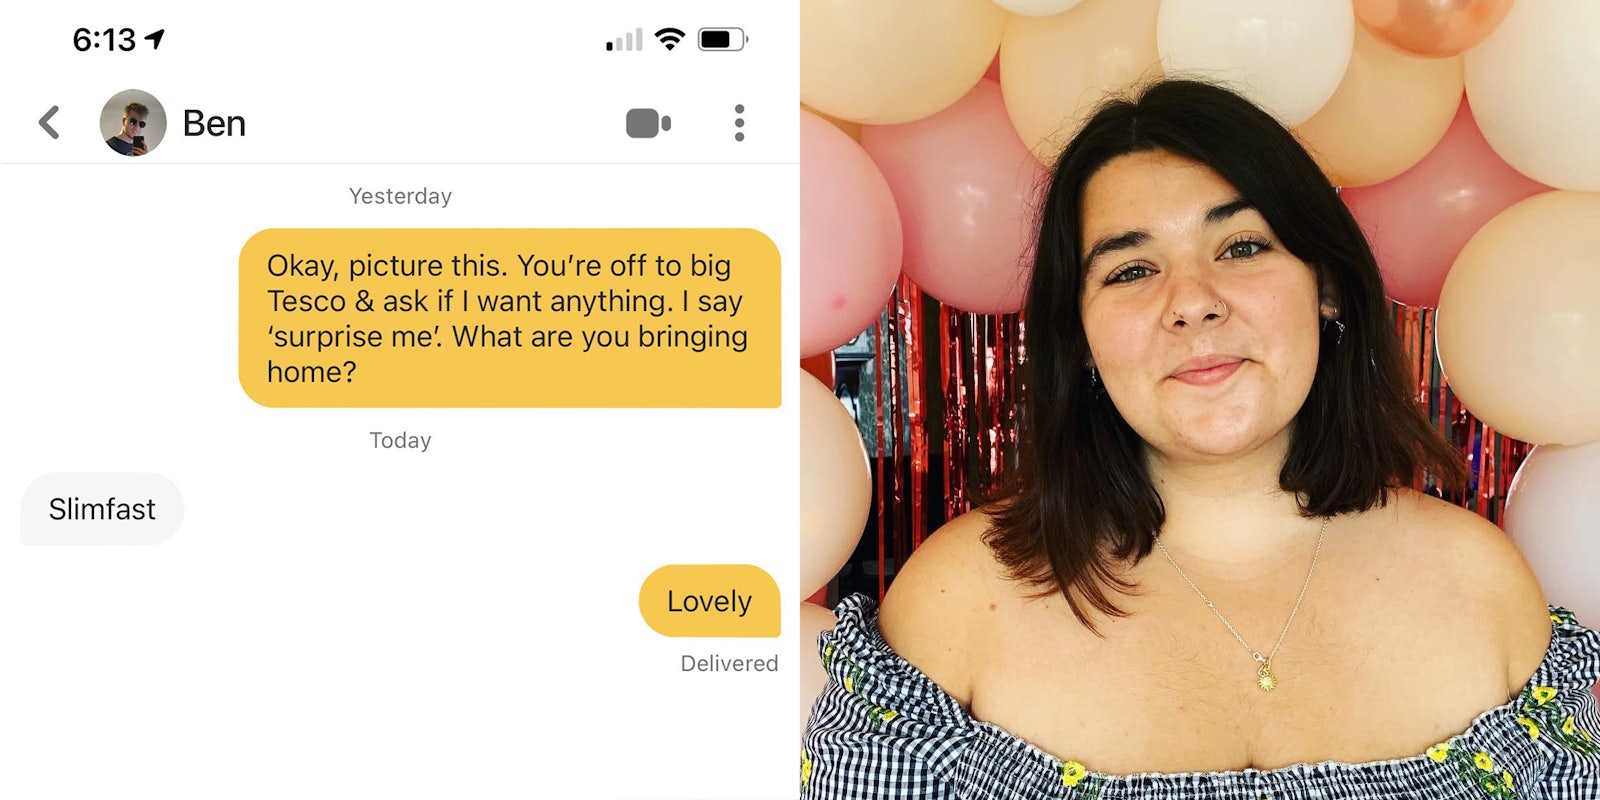 Bumble exchange, user says 'Okay, picture this, You're off to big Tesco & ask if I want anything. I say 'surprise me'. What are you bringing home?'. Ben responds 'Slimfast'. User replies, 'Lovely' (l) Girl in dress with ballons (r)